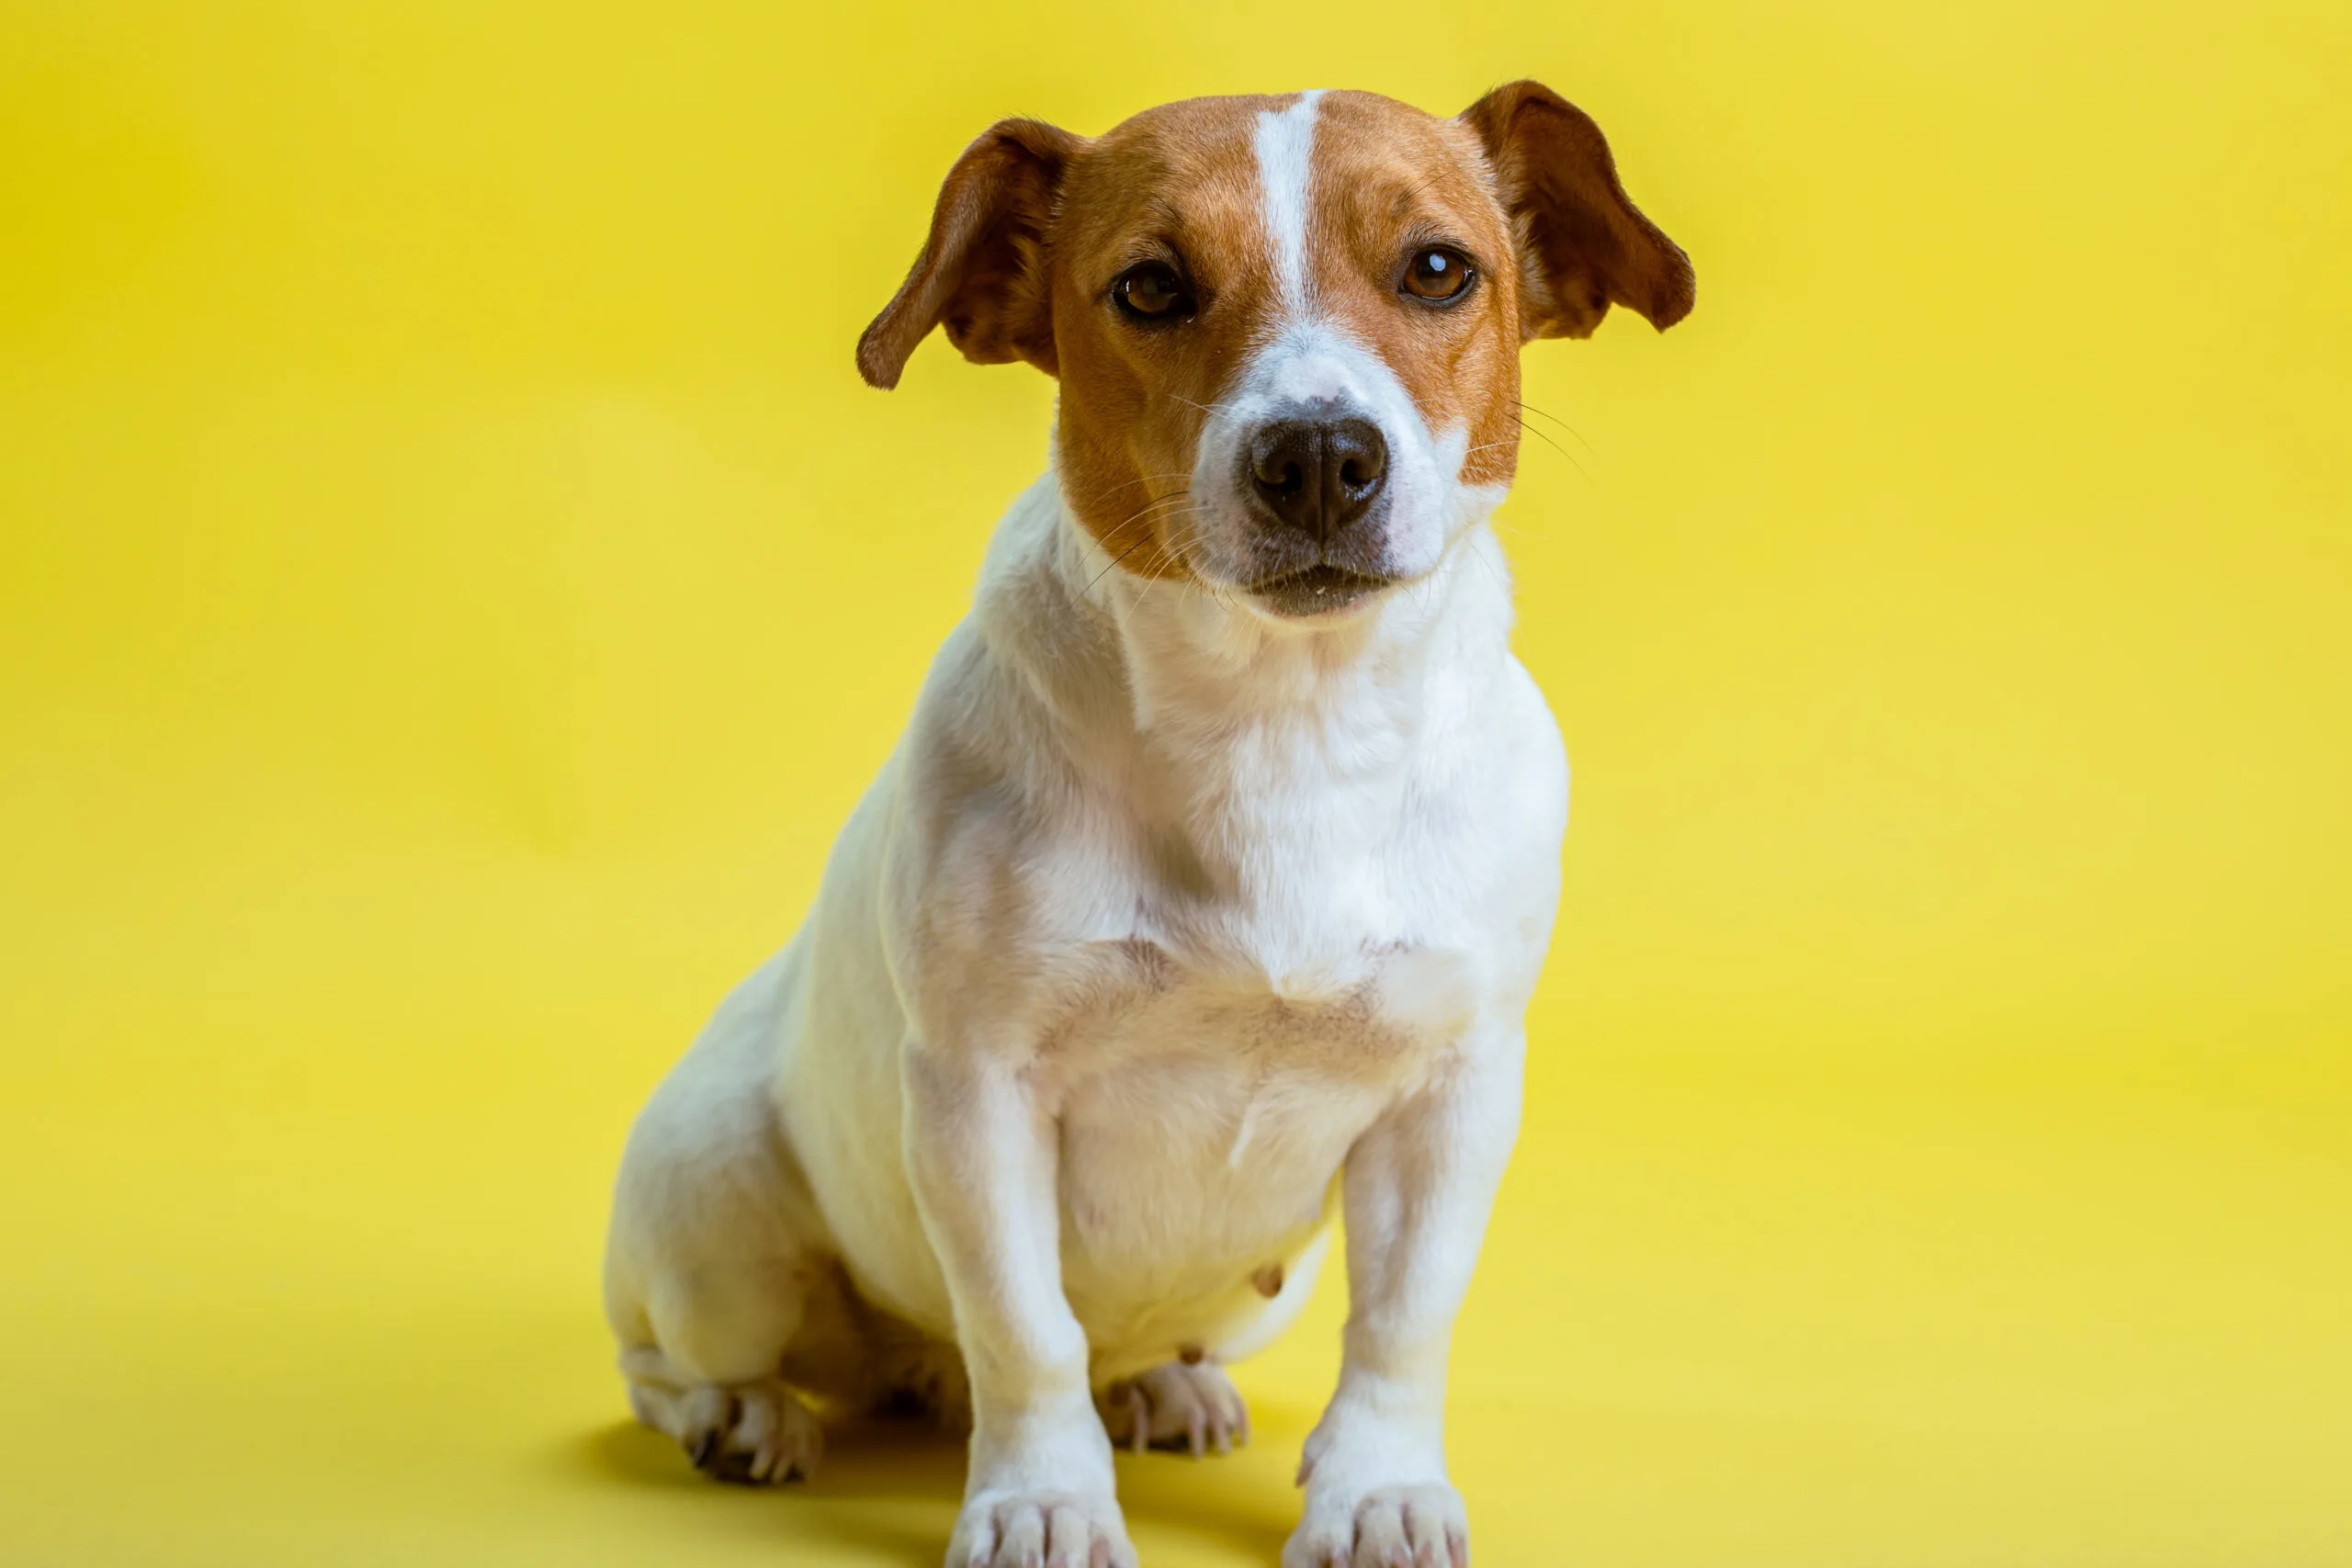 Are jack russell terriers hypoallergenic?